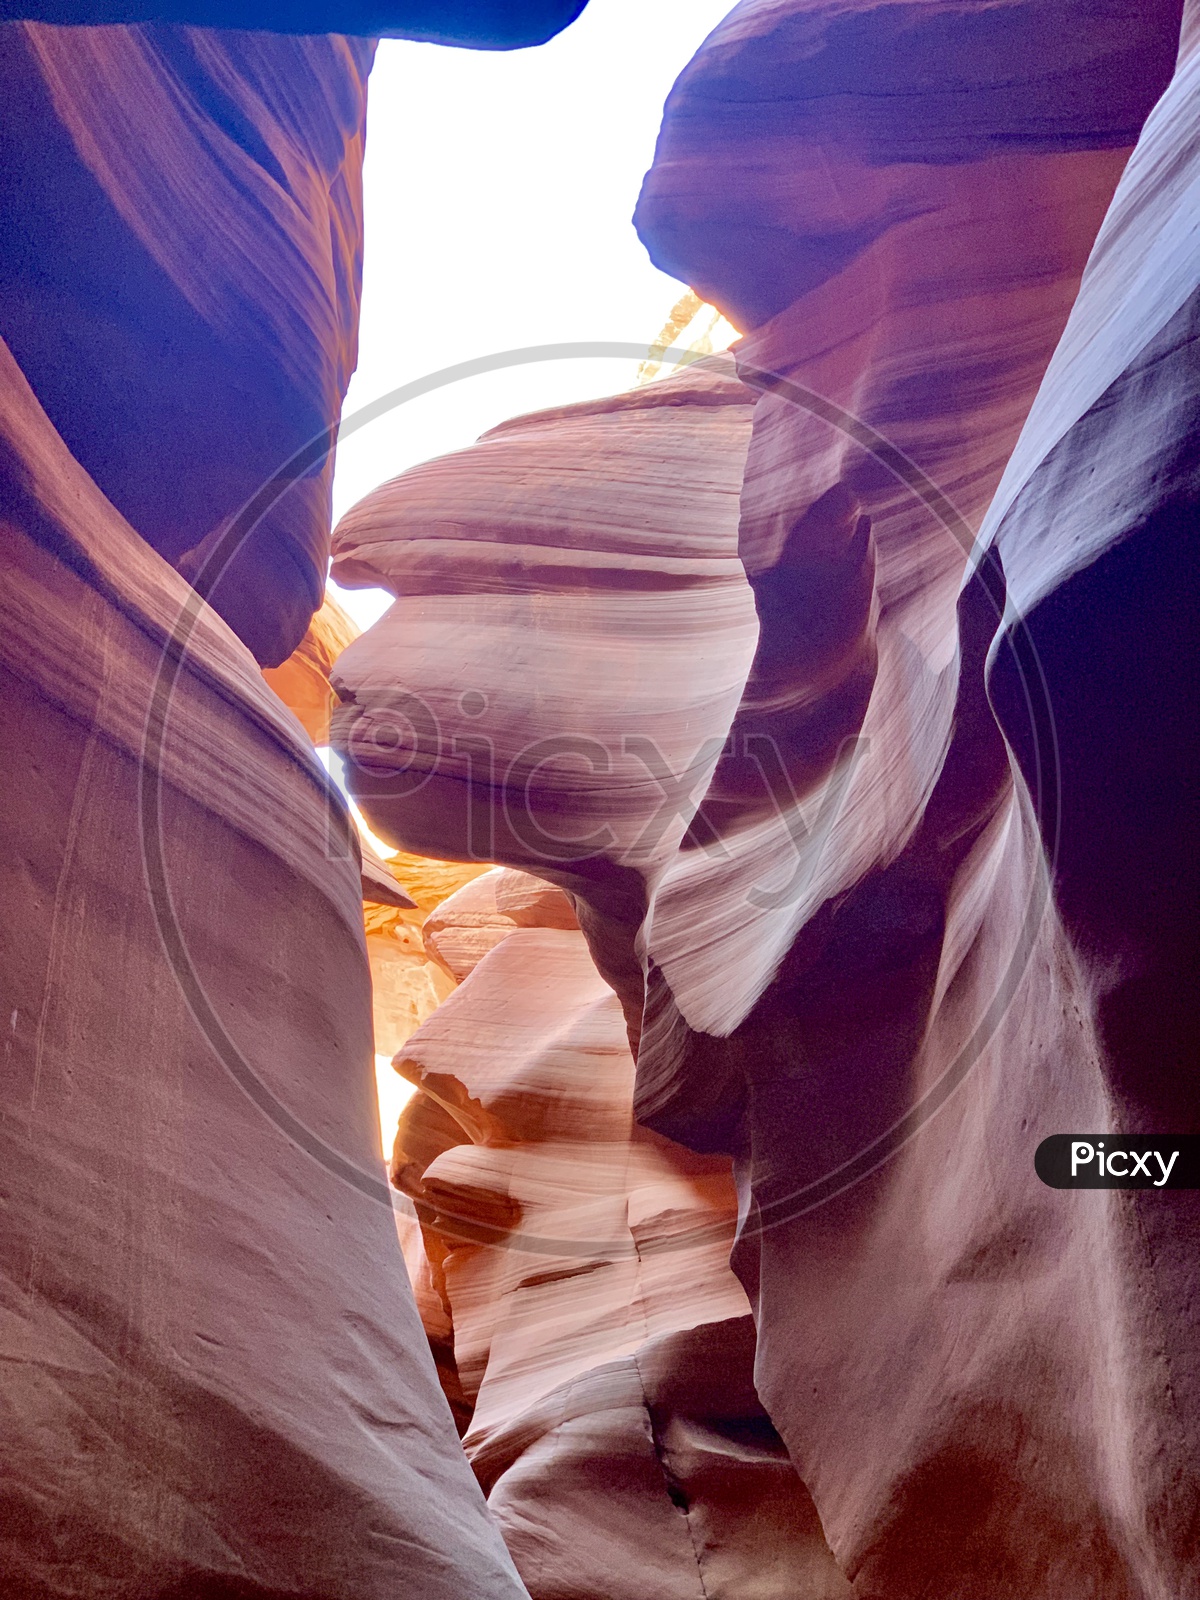 Lower Antelope Canyons resembling Trump's Face